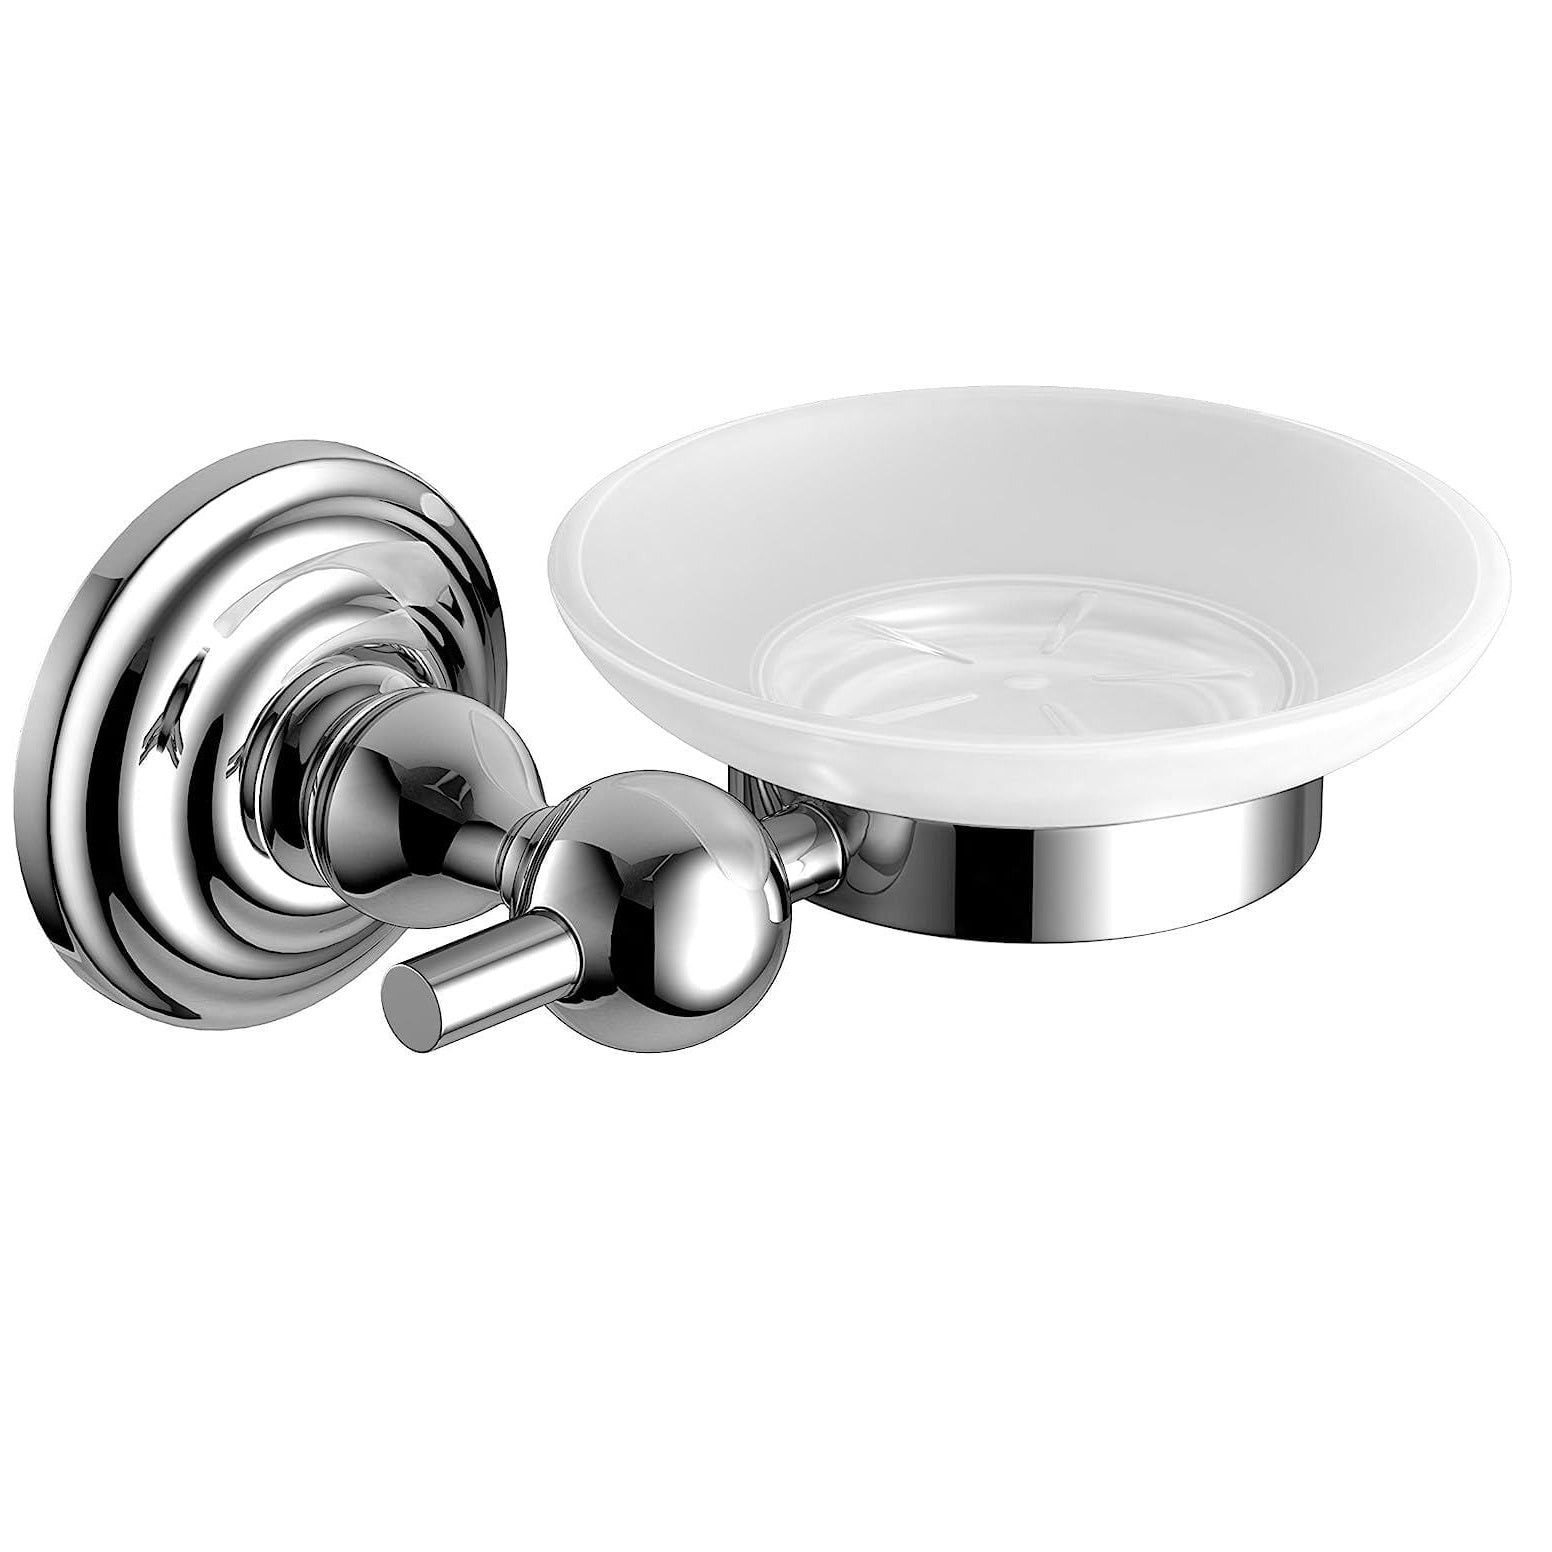 Traditional Wall Mounted Round Soap Dish Holder - Chrome